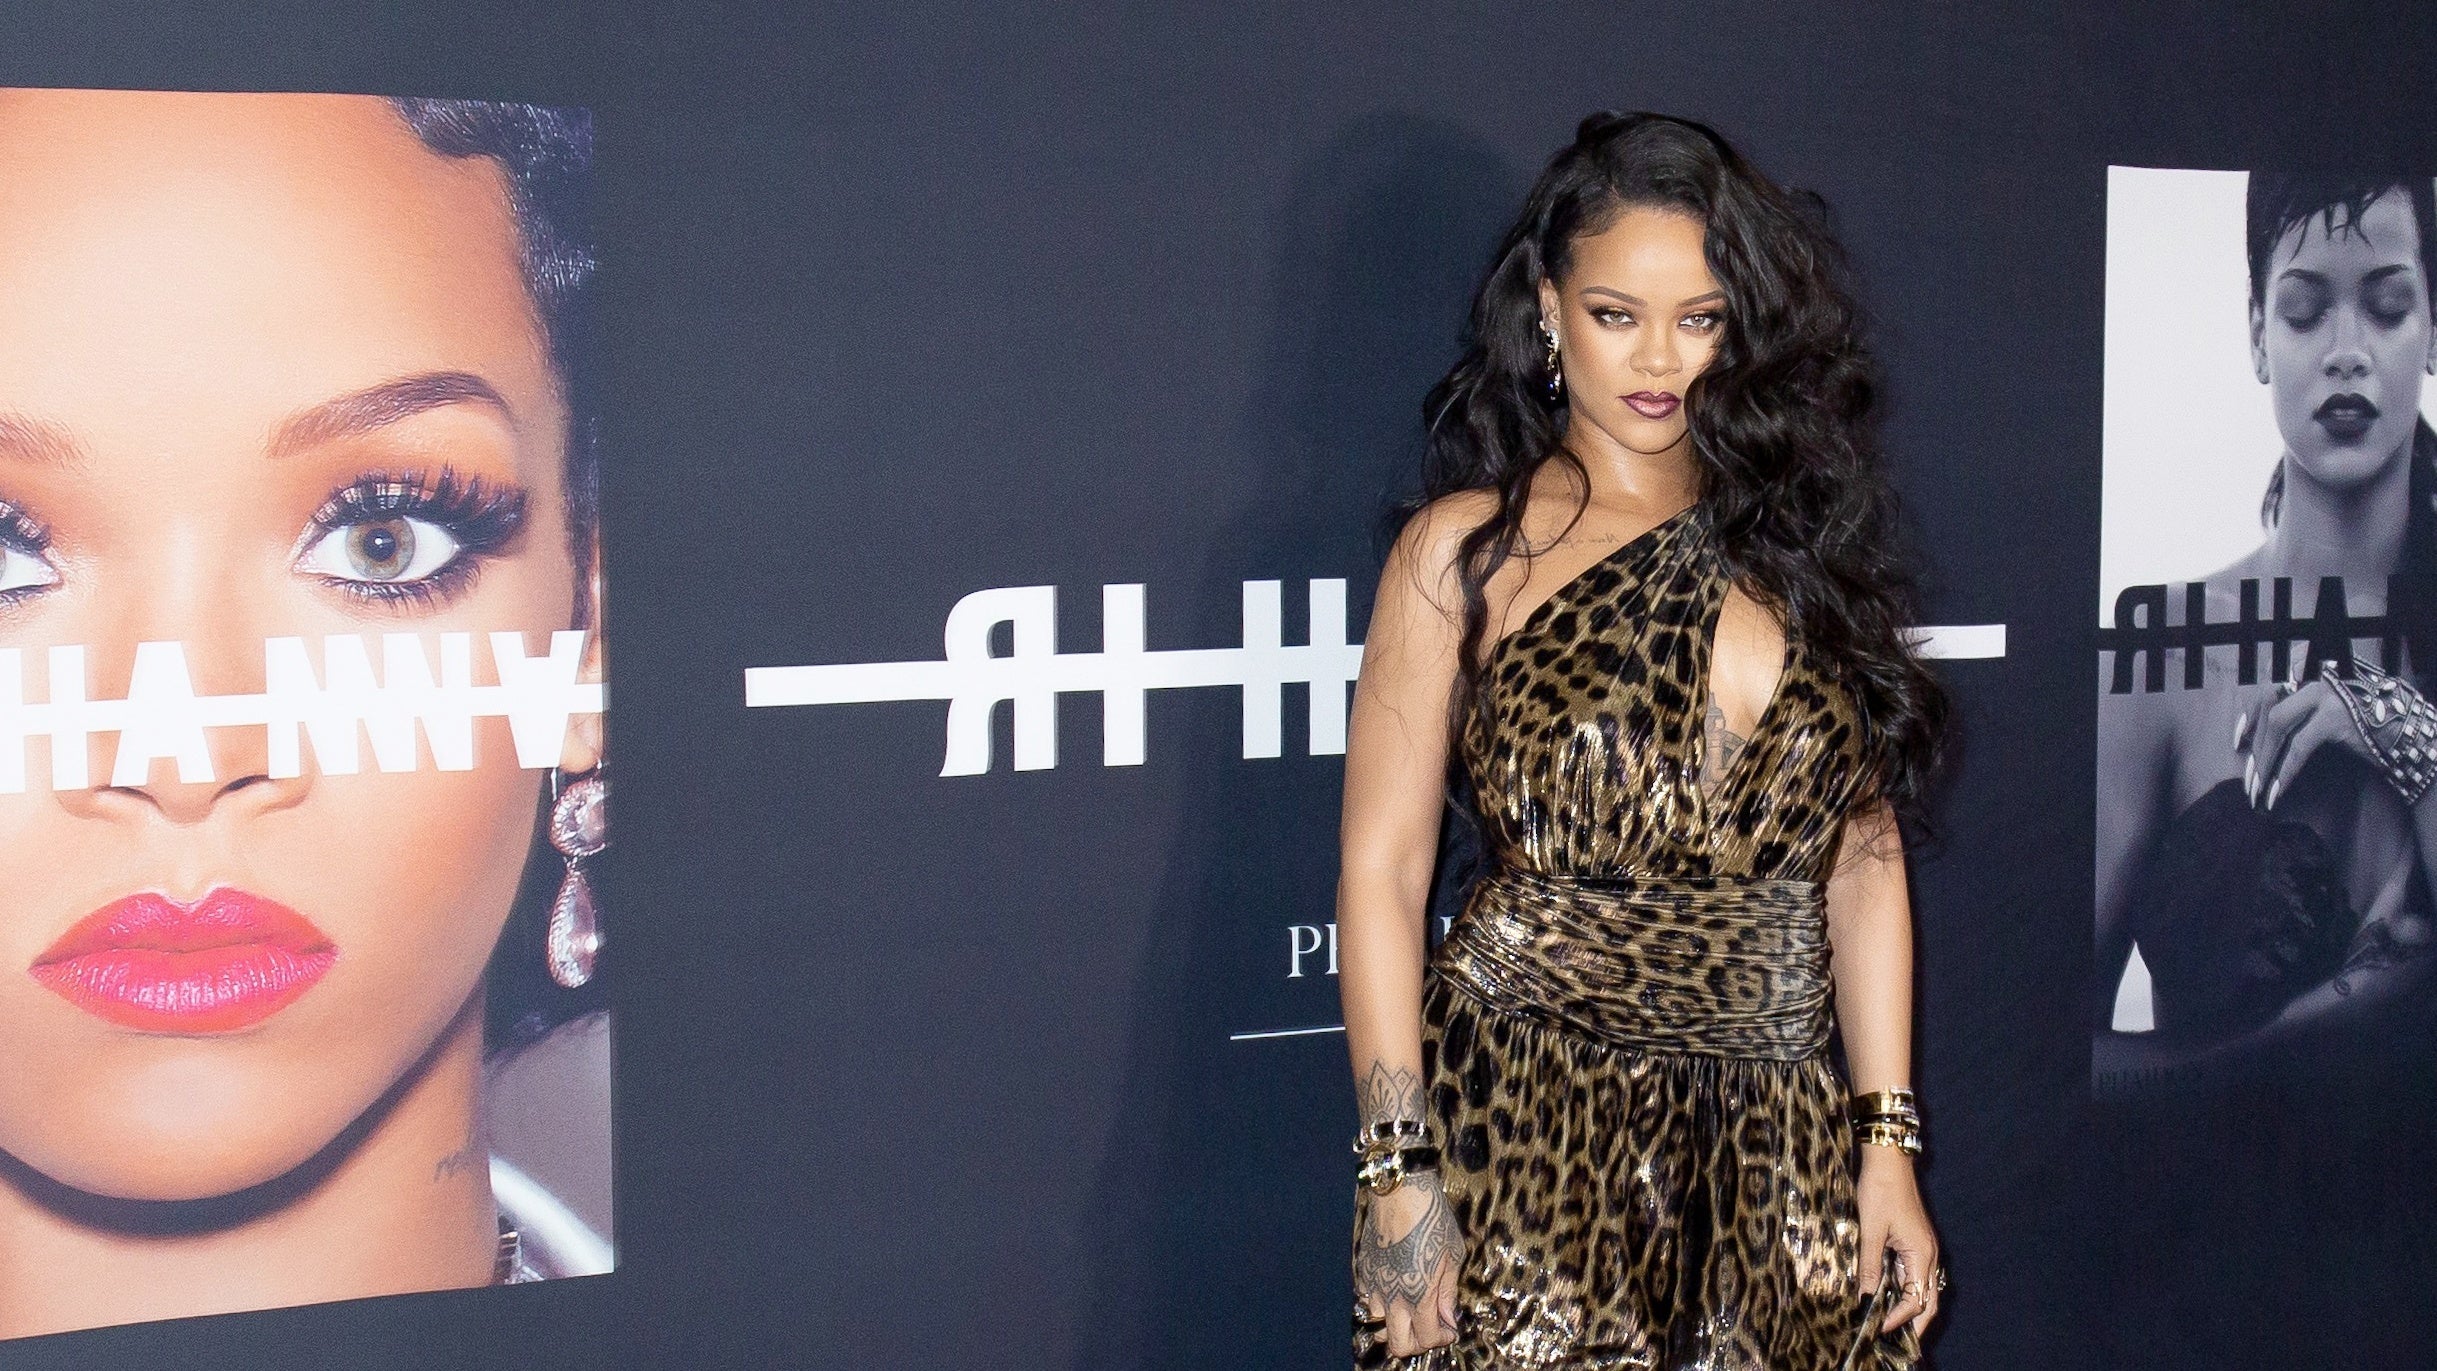 Rihanna Launches Another Big First: A Visual Autobiography